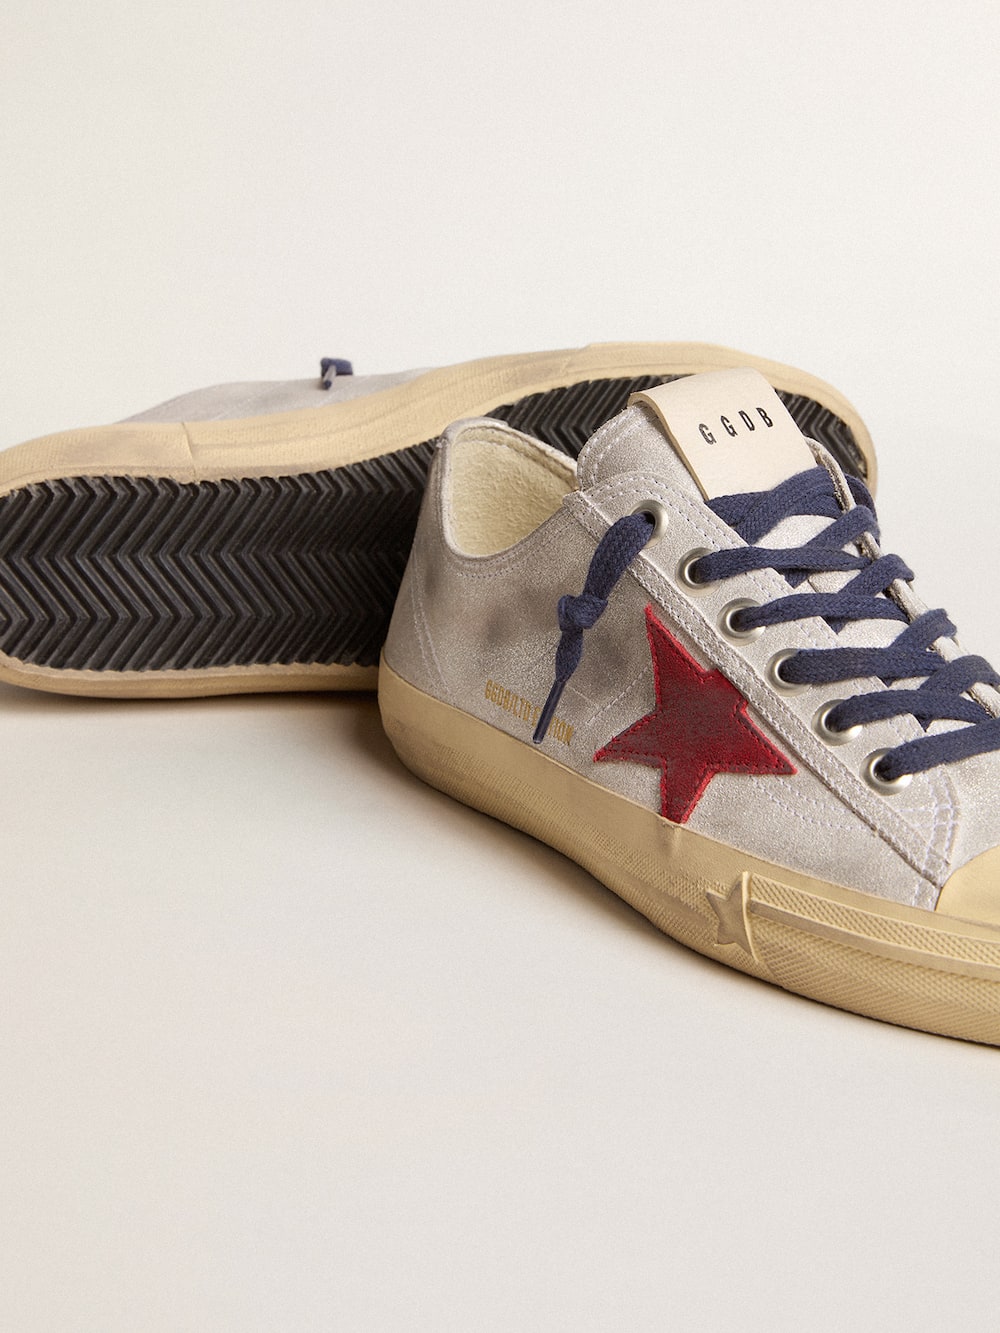 Golden Goose - Women's V-Star LTD in silver metallic suede with red suede star in 